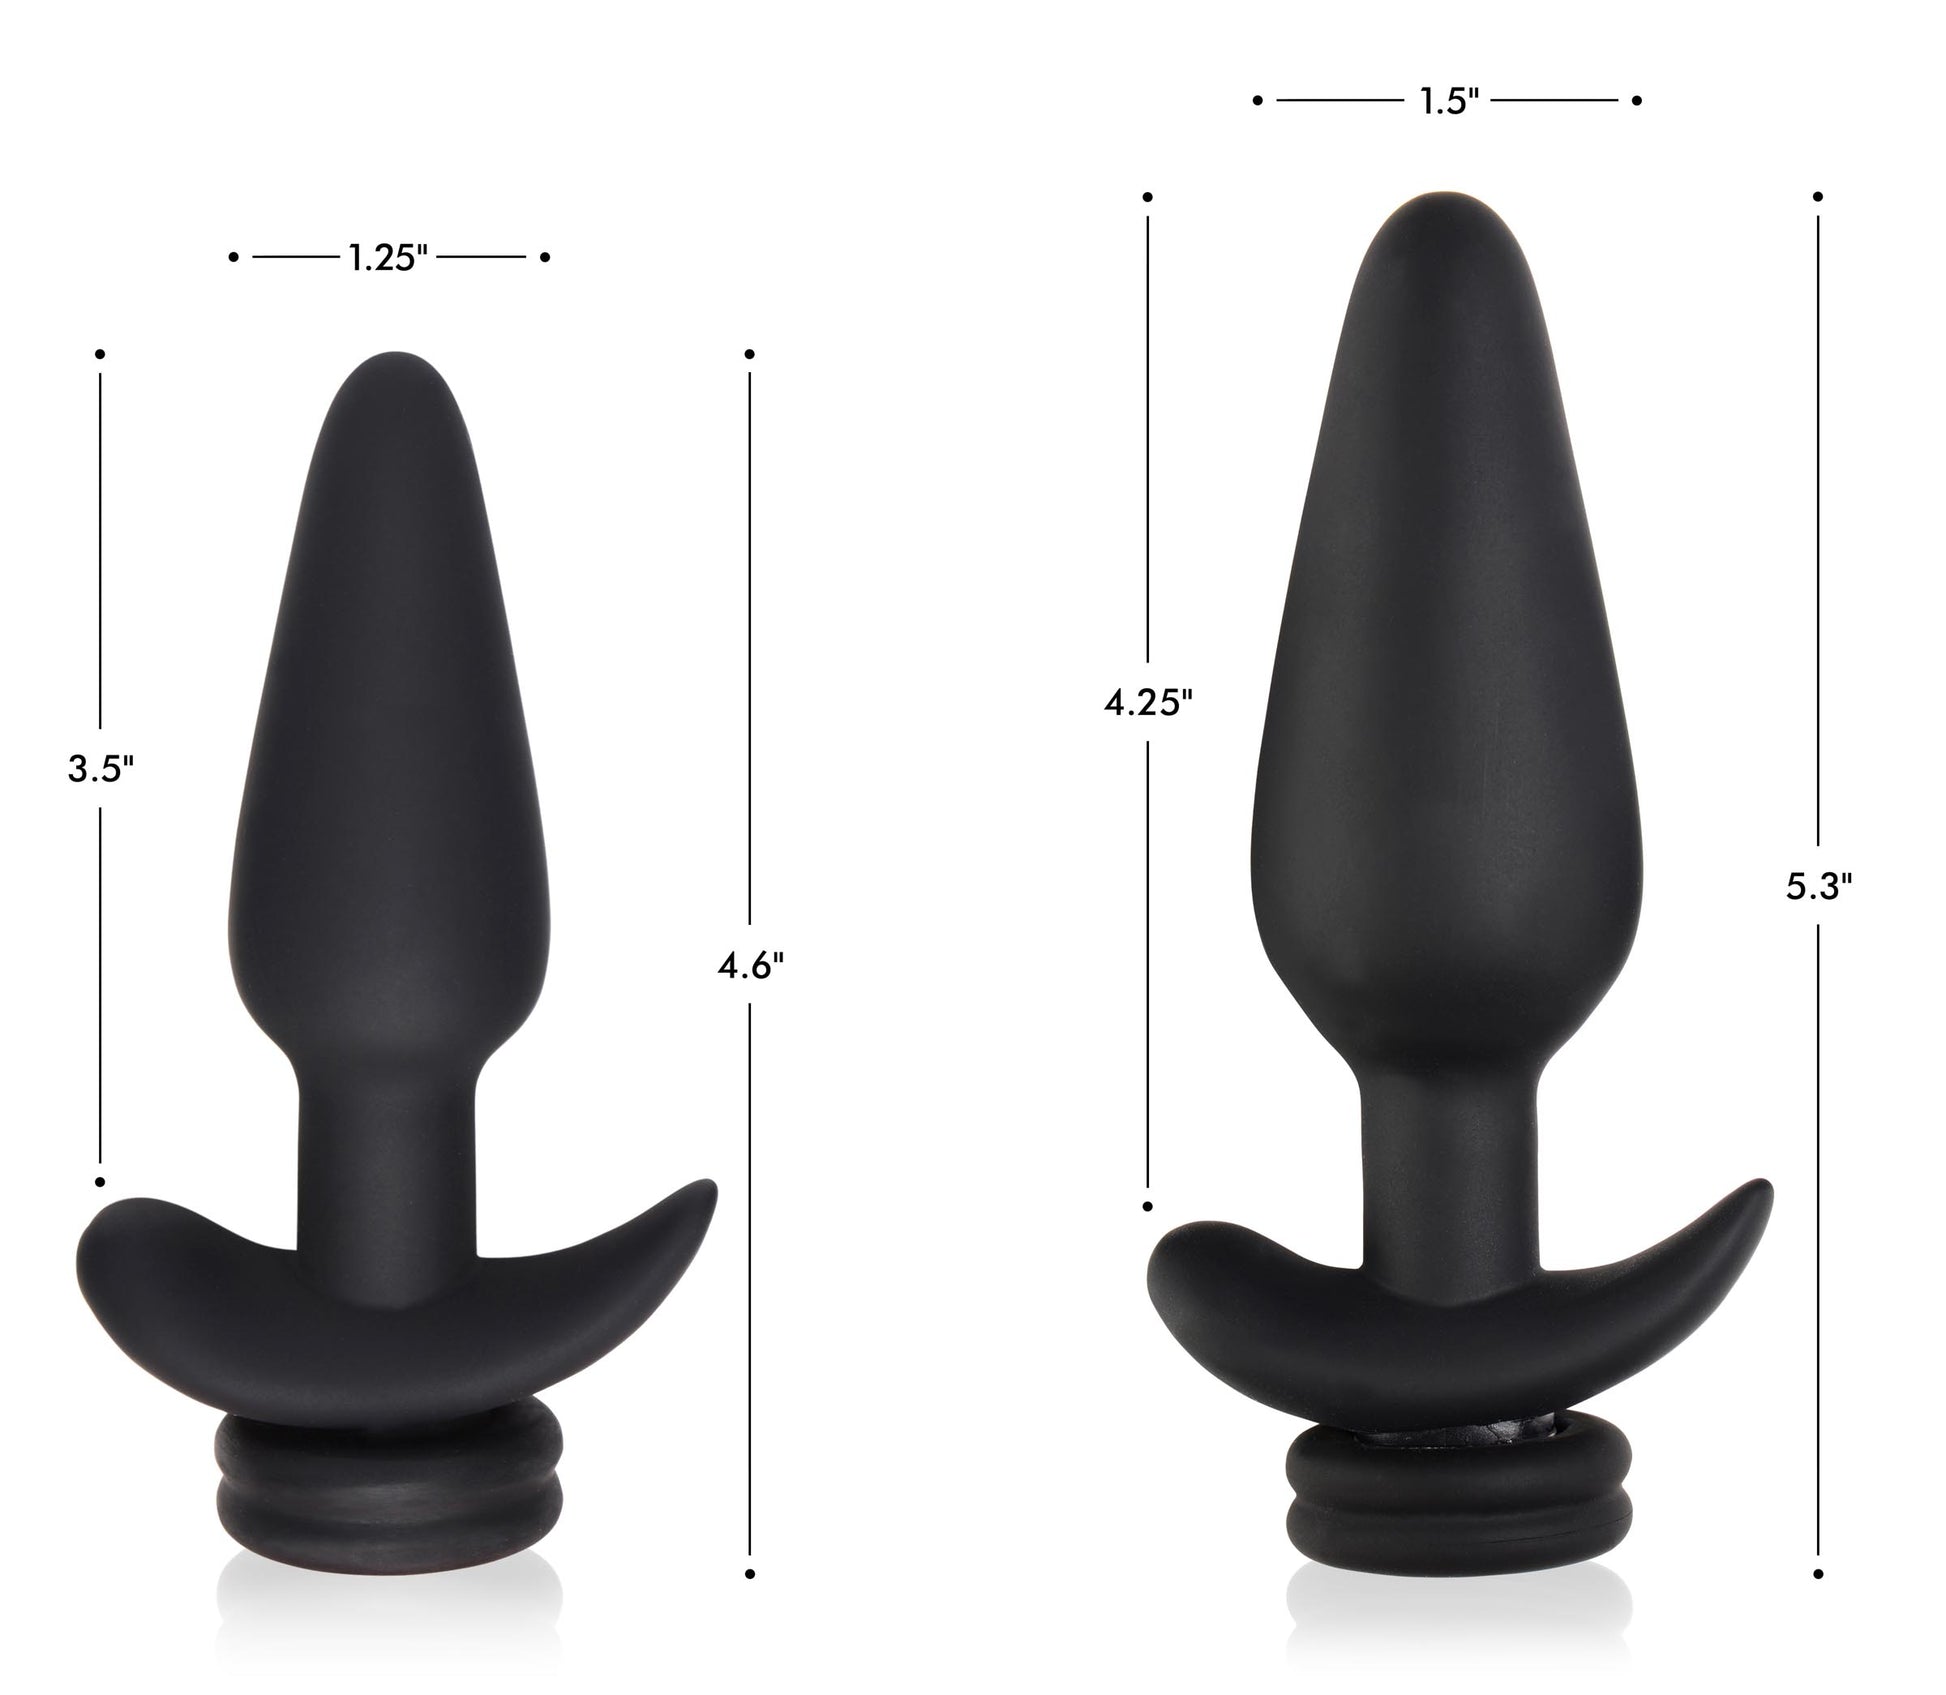 Small Vibrating Anal Plug with Interchangeable Bunny Tail - White - UABDSM